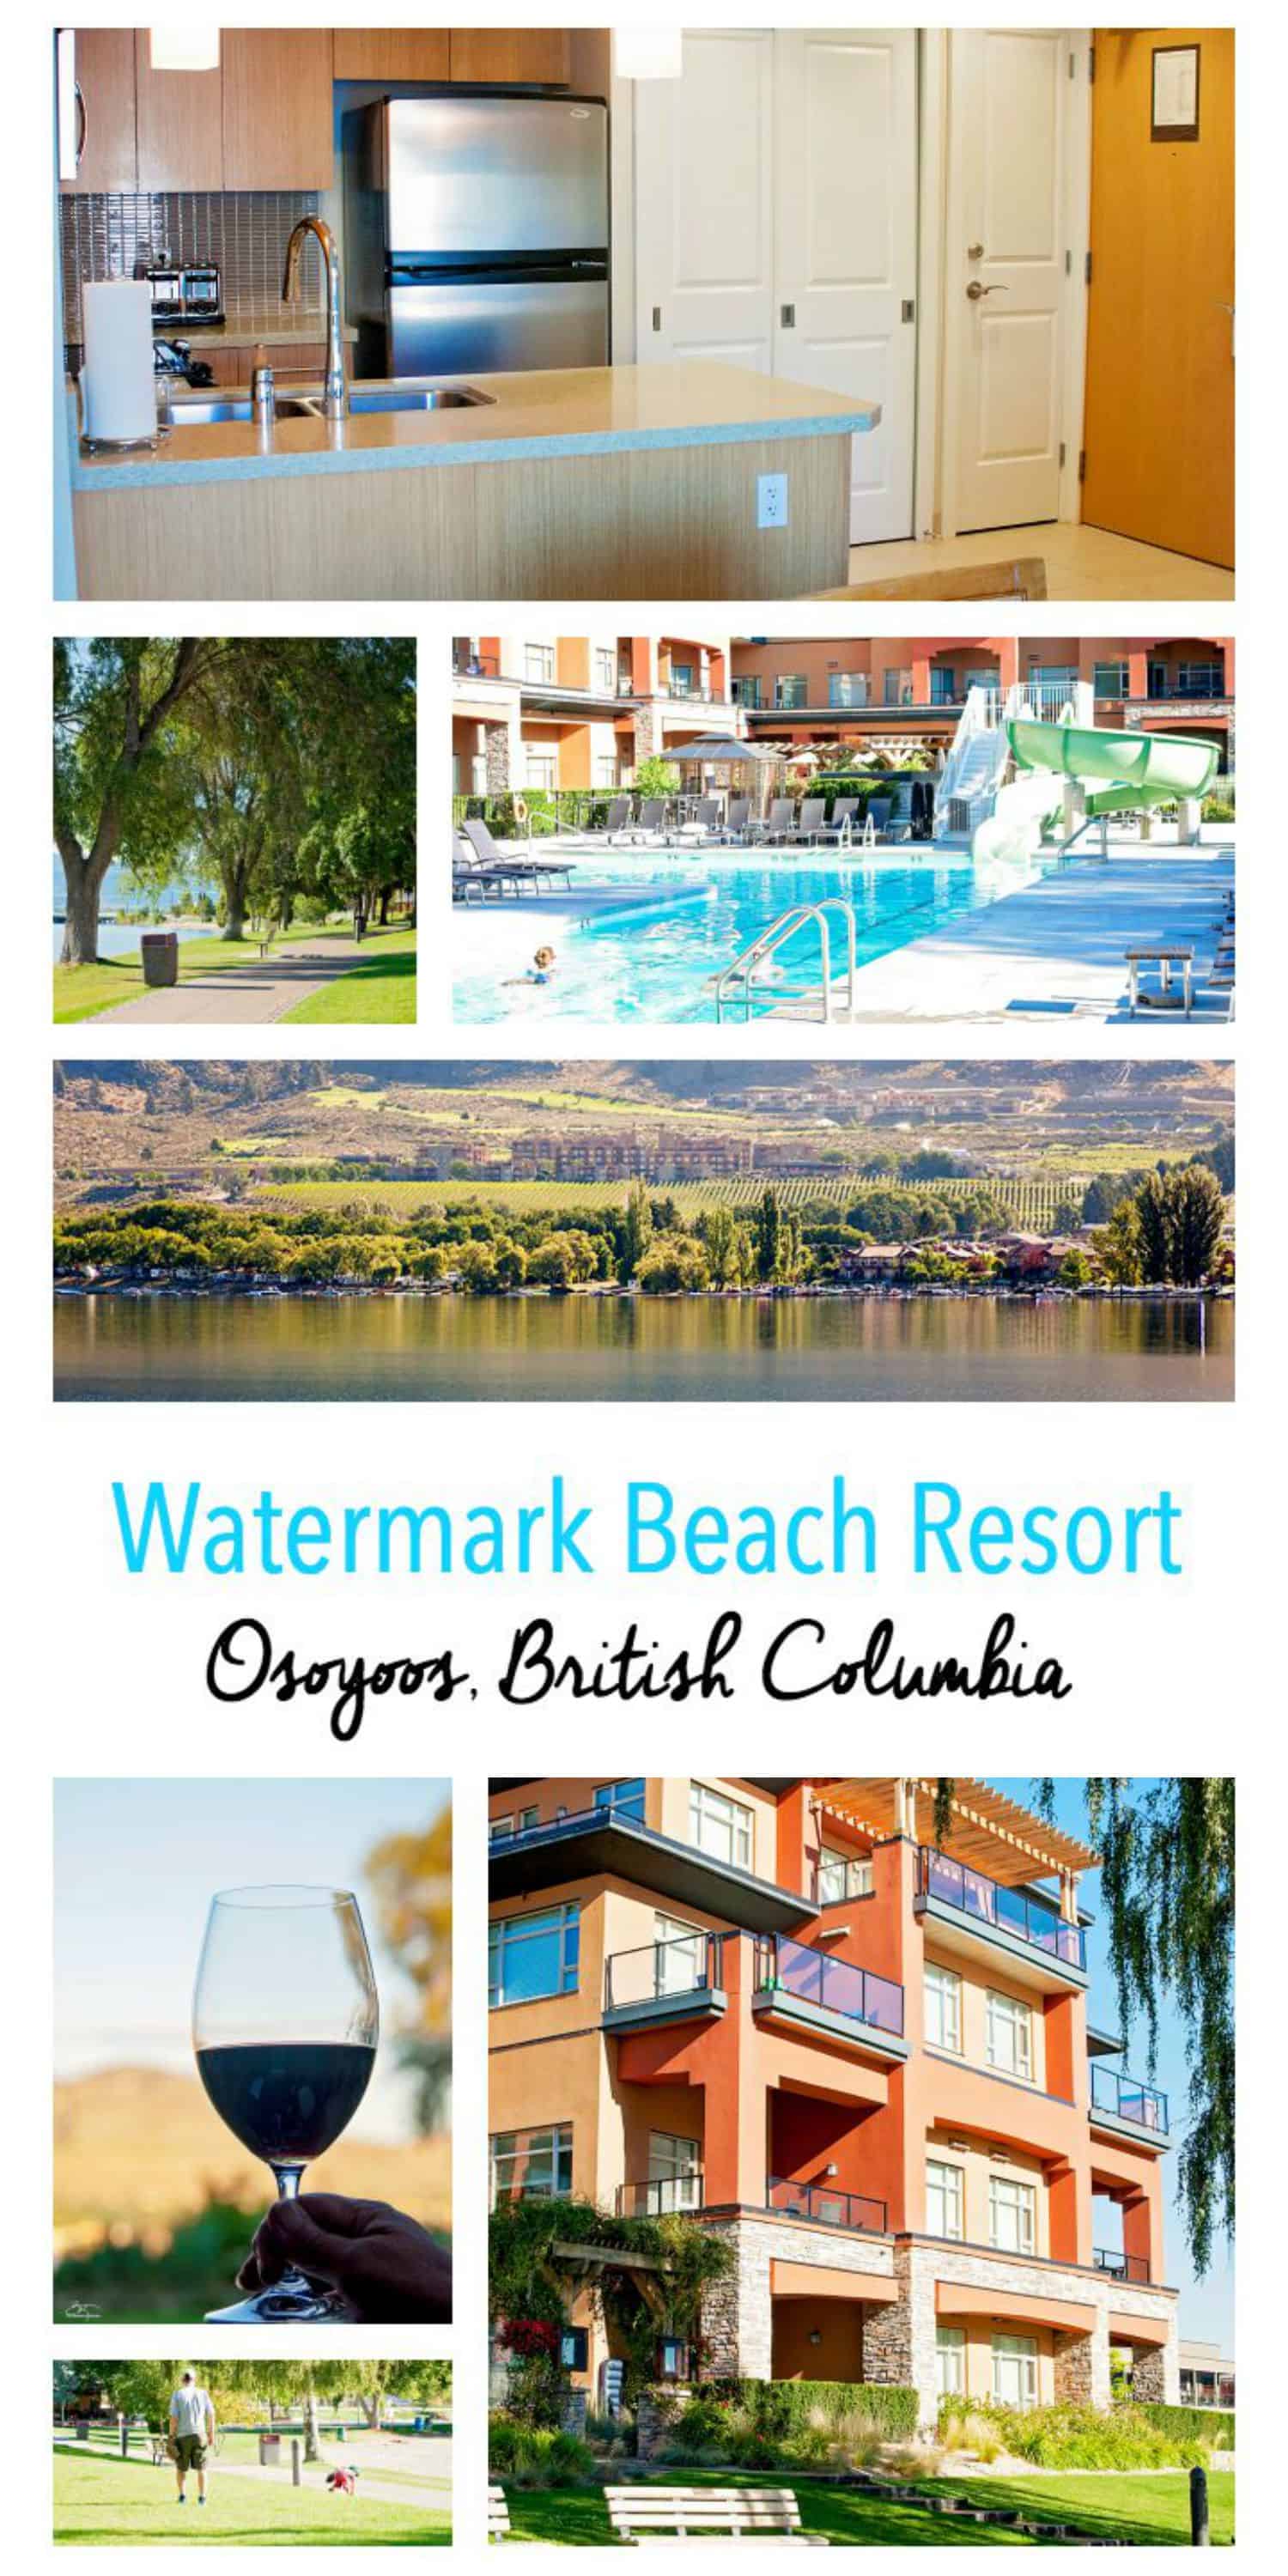 The Watermark Beach Resort in Osoyoos, British Columbia is a must on your Southern Okanagan vacation. This Okanagan resort has it all! It's the perfect family destination, and sets the scene for weddings, reunions or just a night away. 